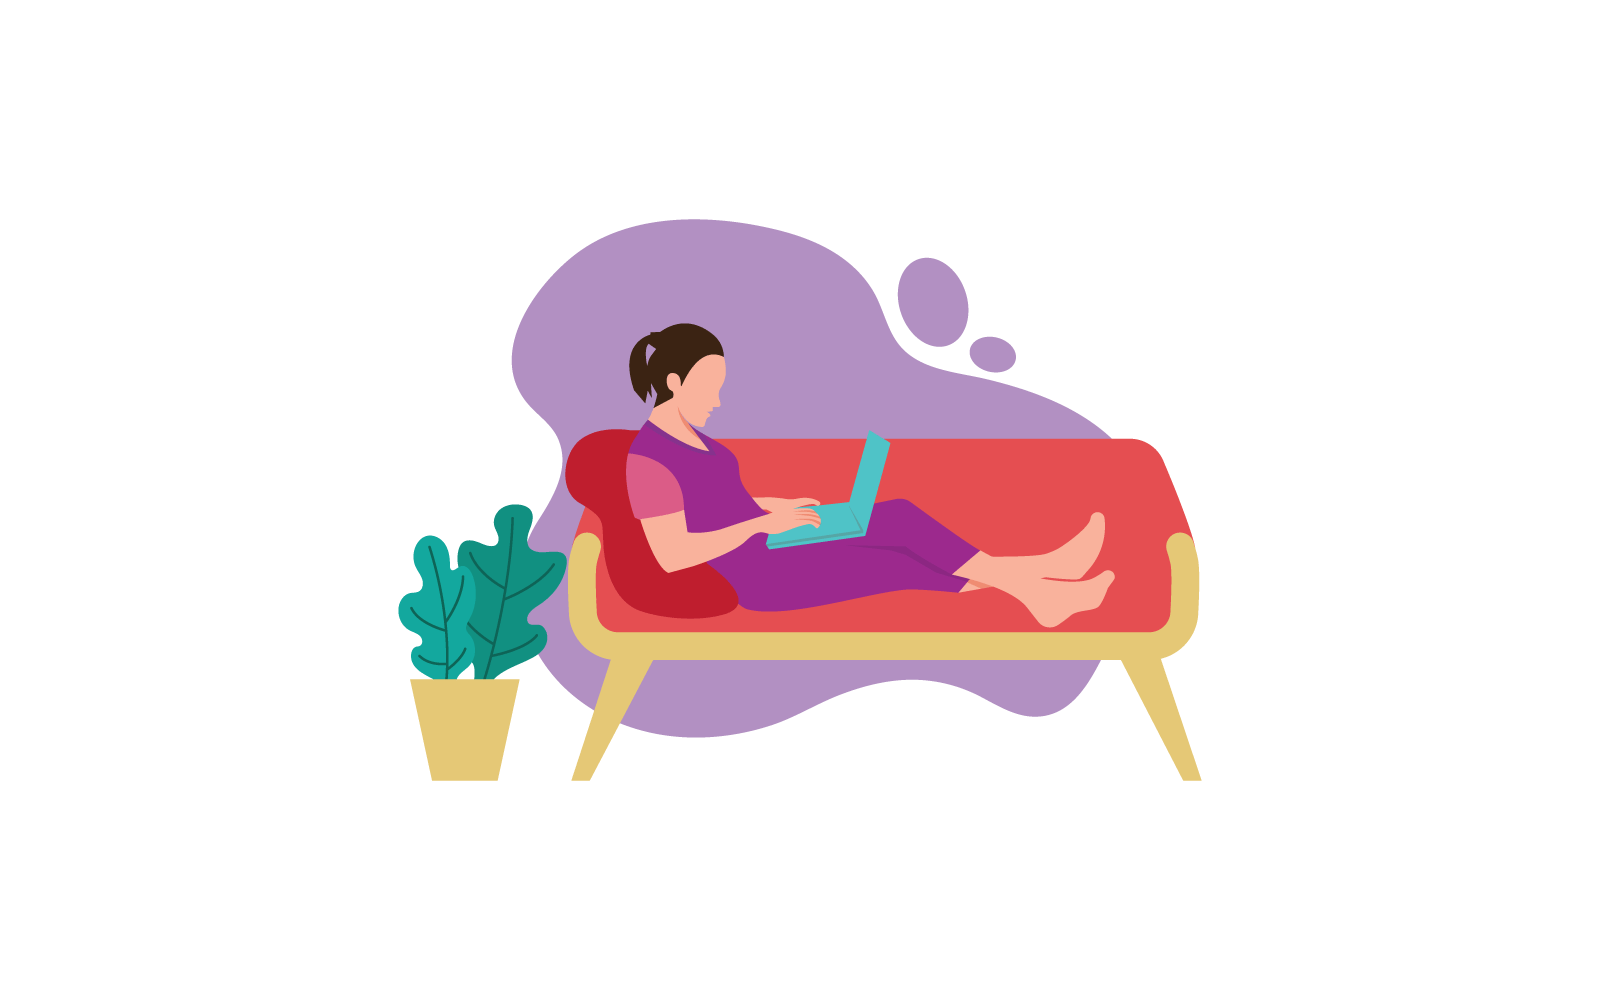 Women with laptop work from home illustration flat design